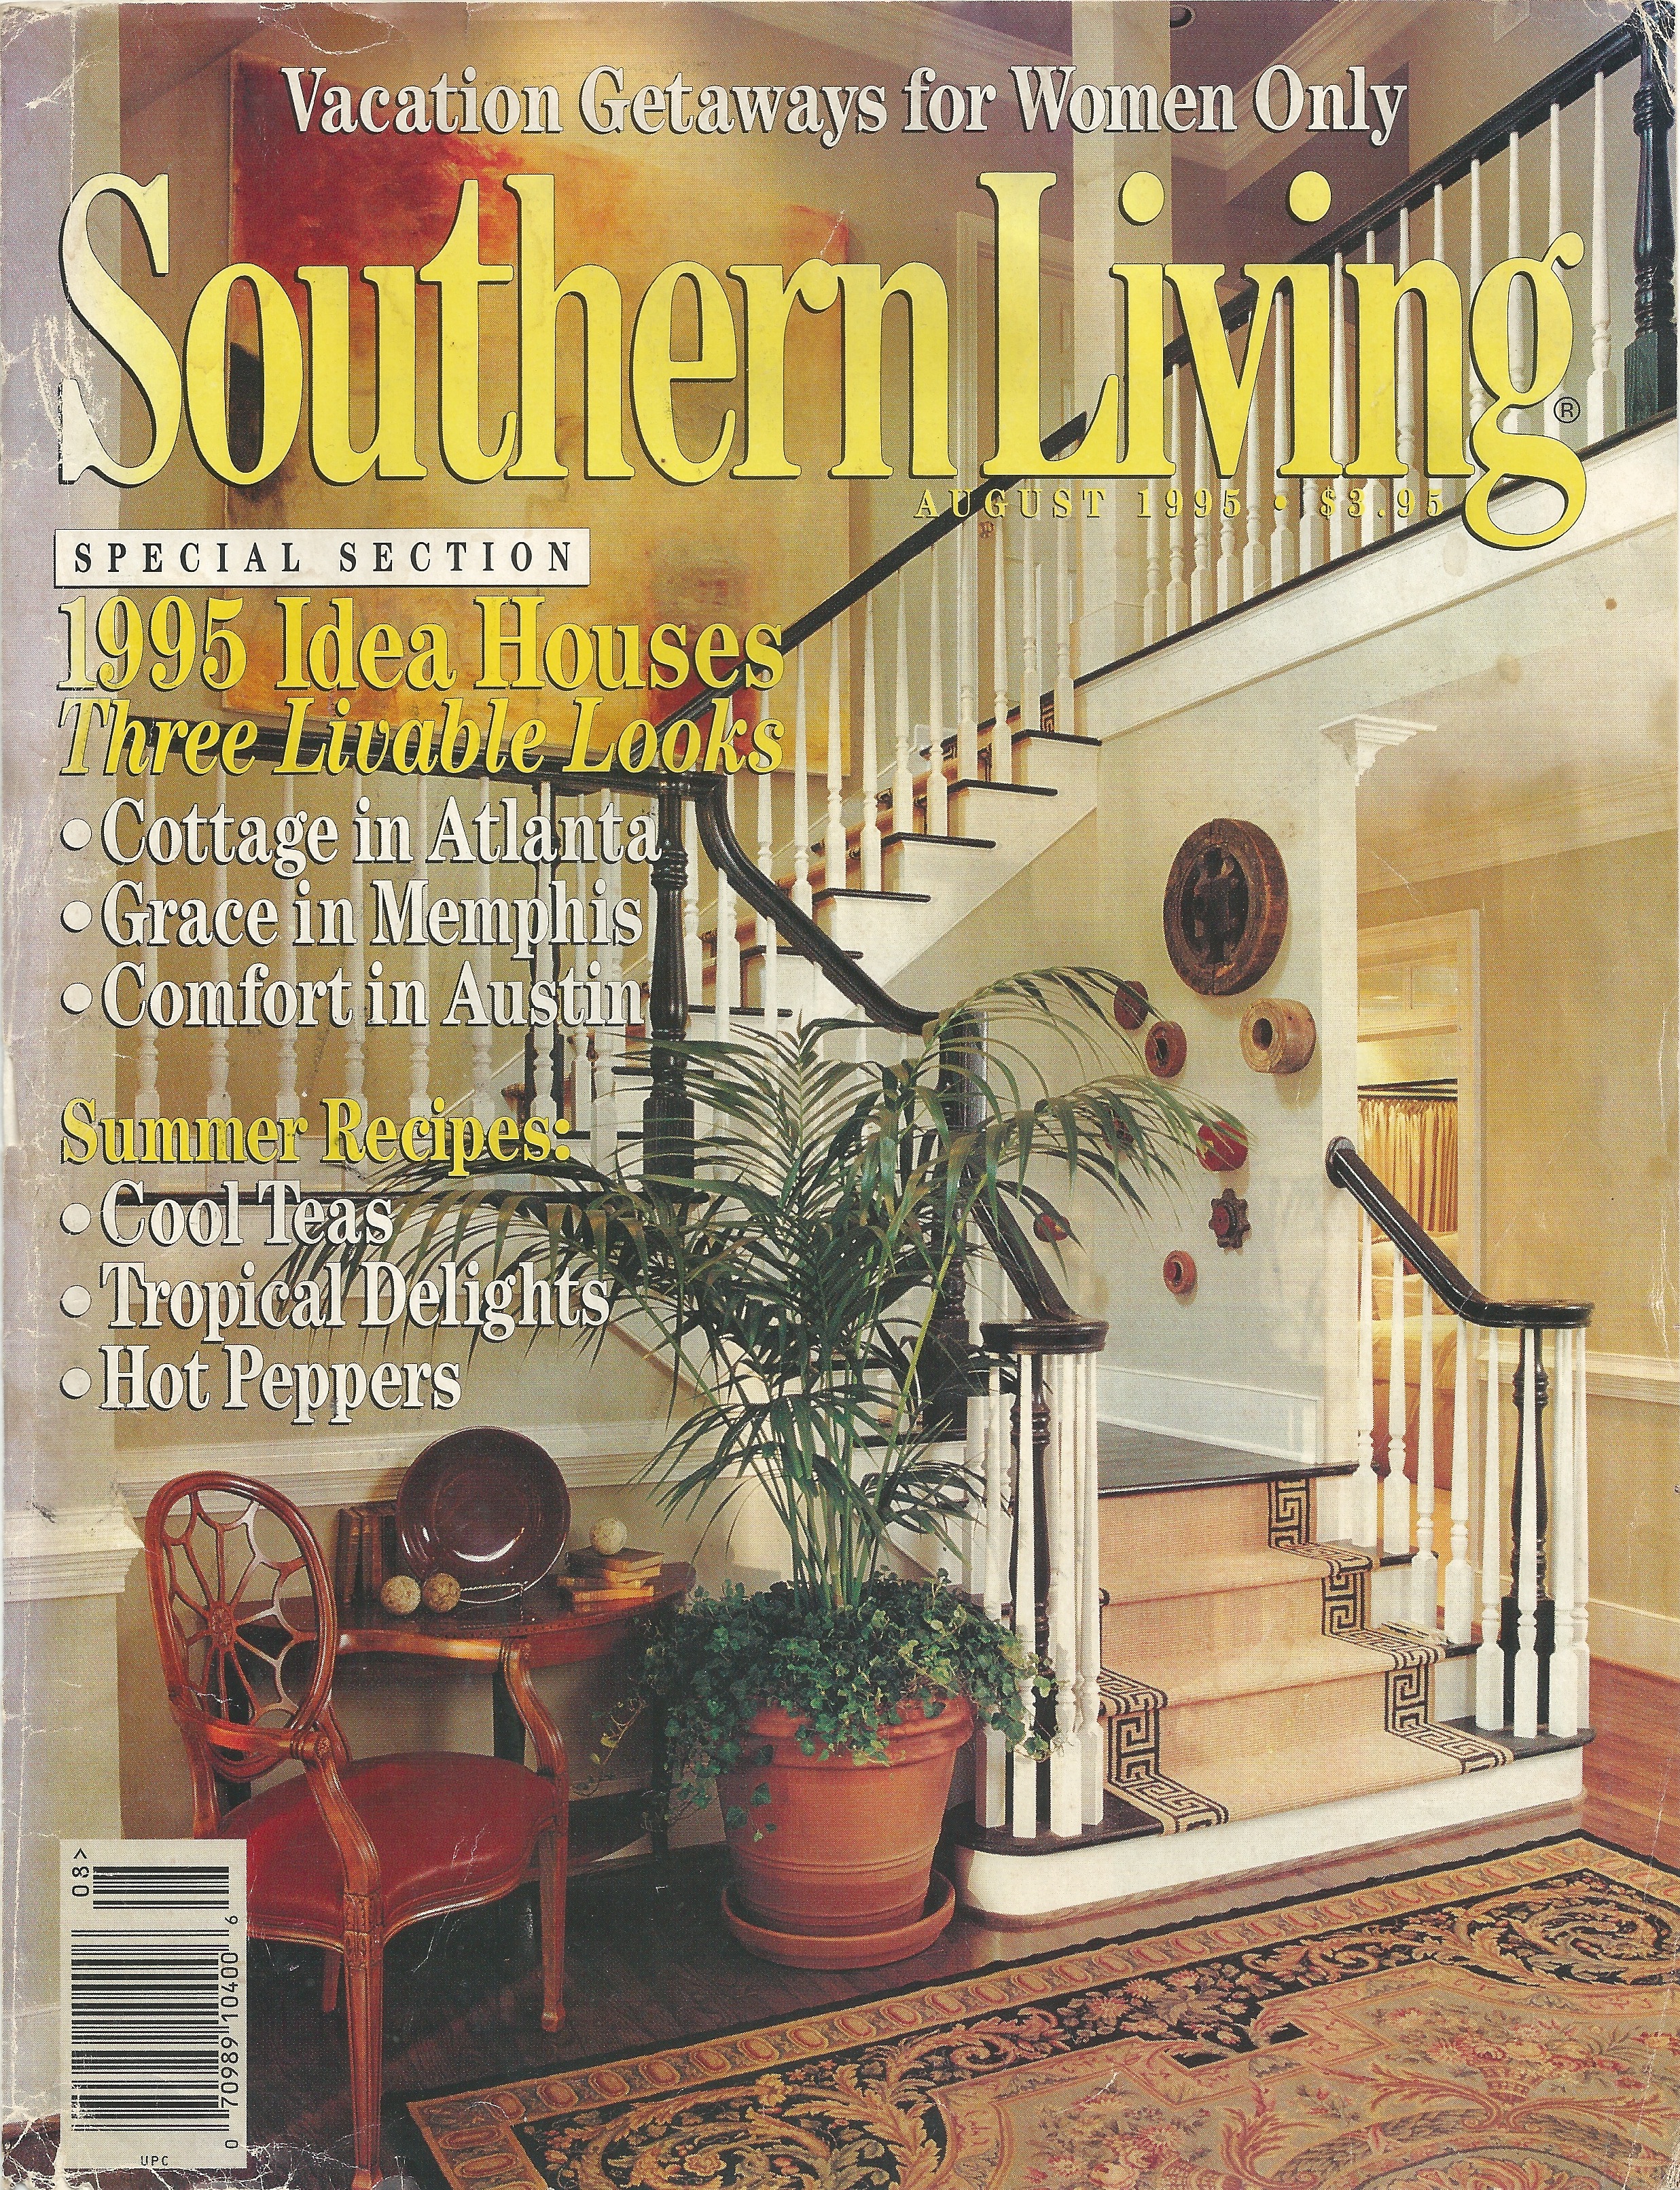 Southern Living Cover.jpg